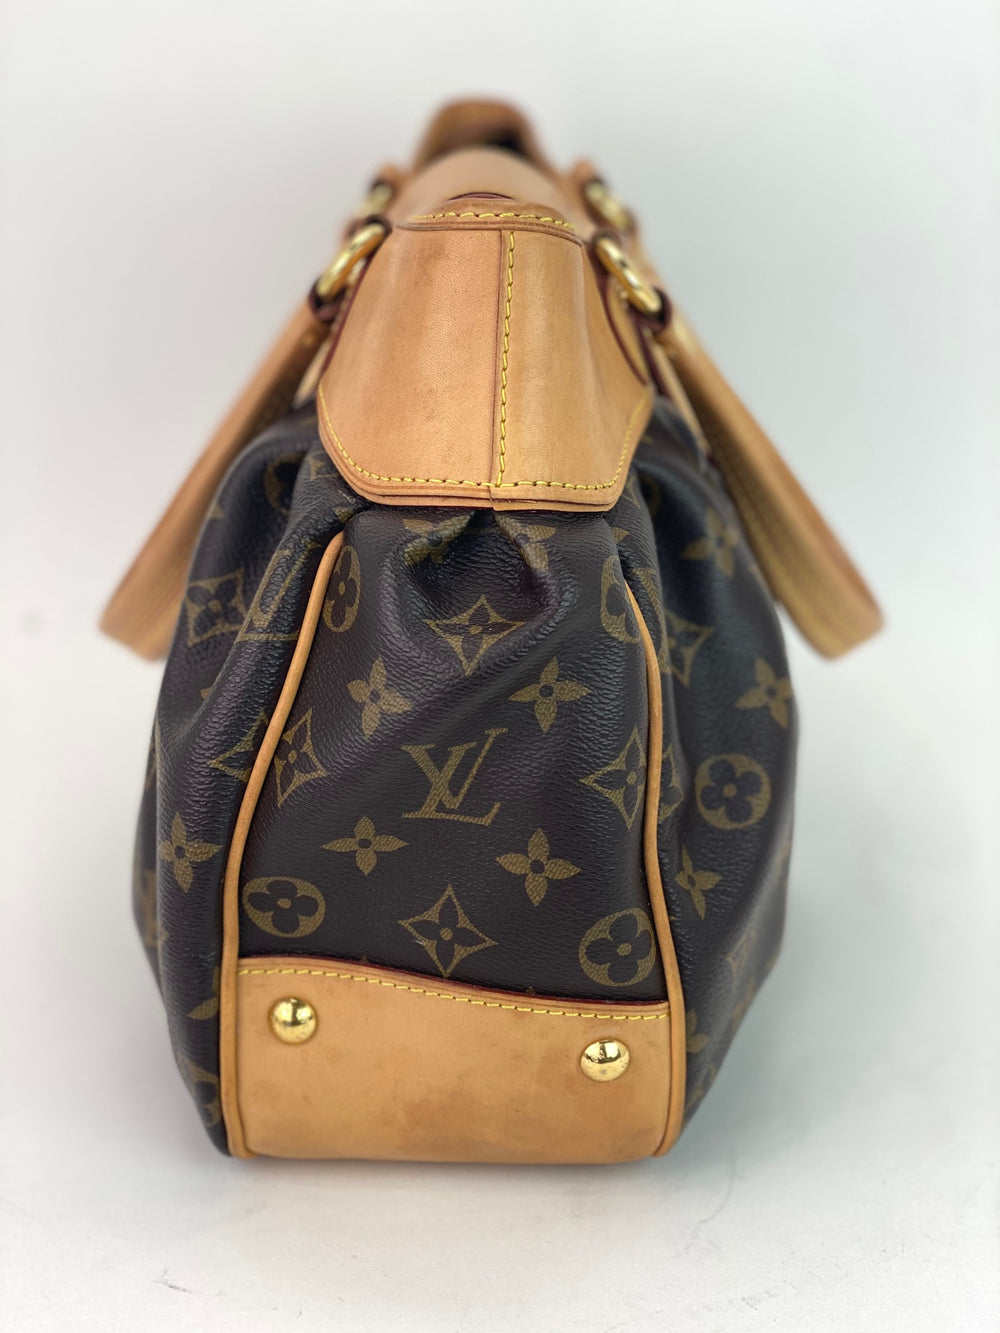 Louis+Vuitton+Boetie+Tote+PM+Brown+Leather for sale online